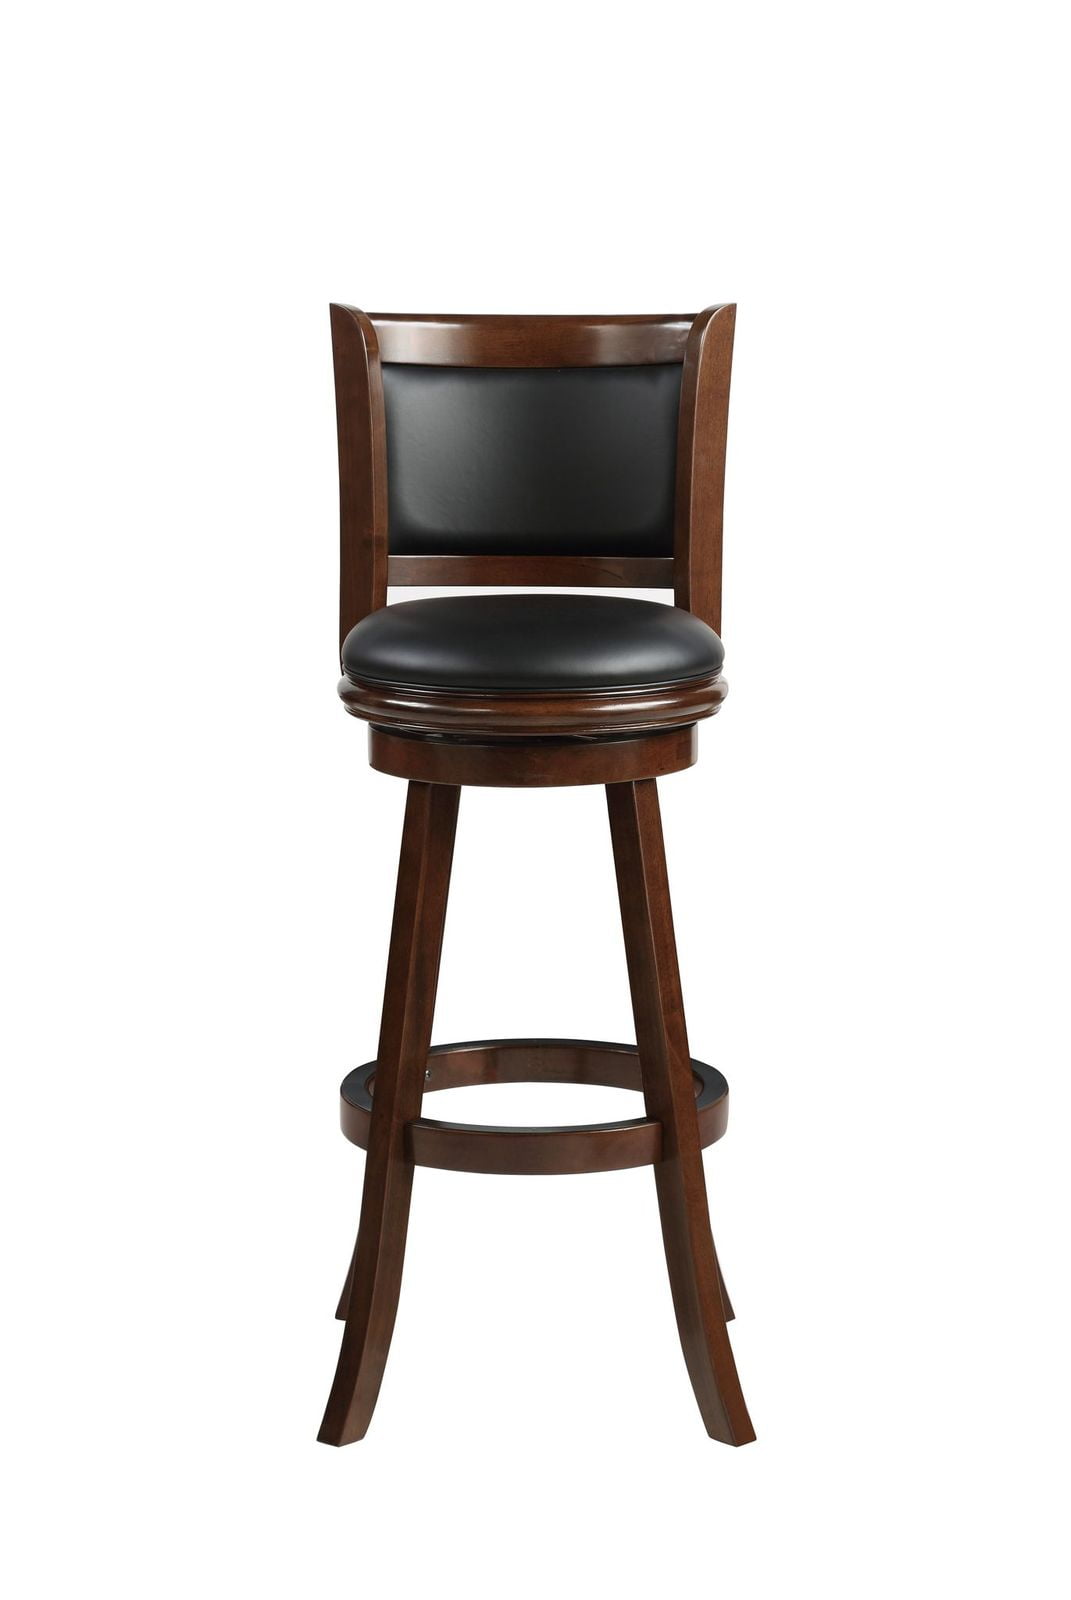 Details about   24 in Black Swivel mechanism Cushioned Bar Stool Highly durable design 